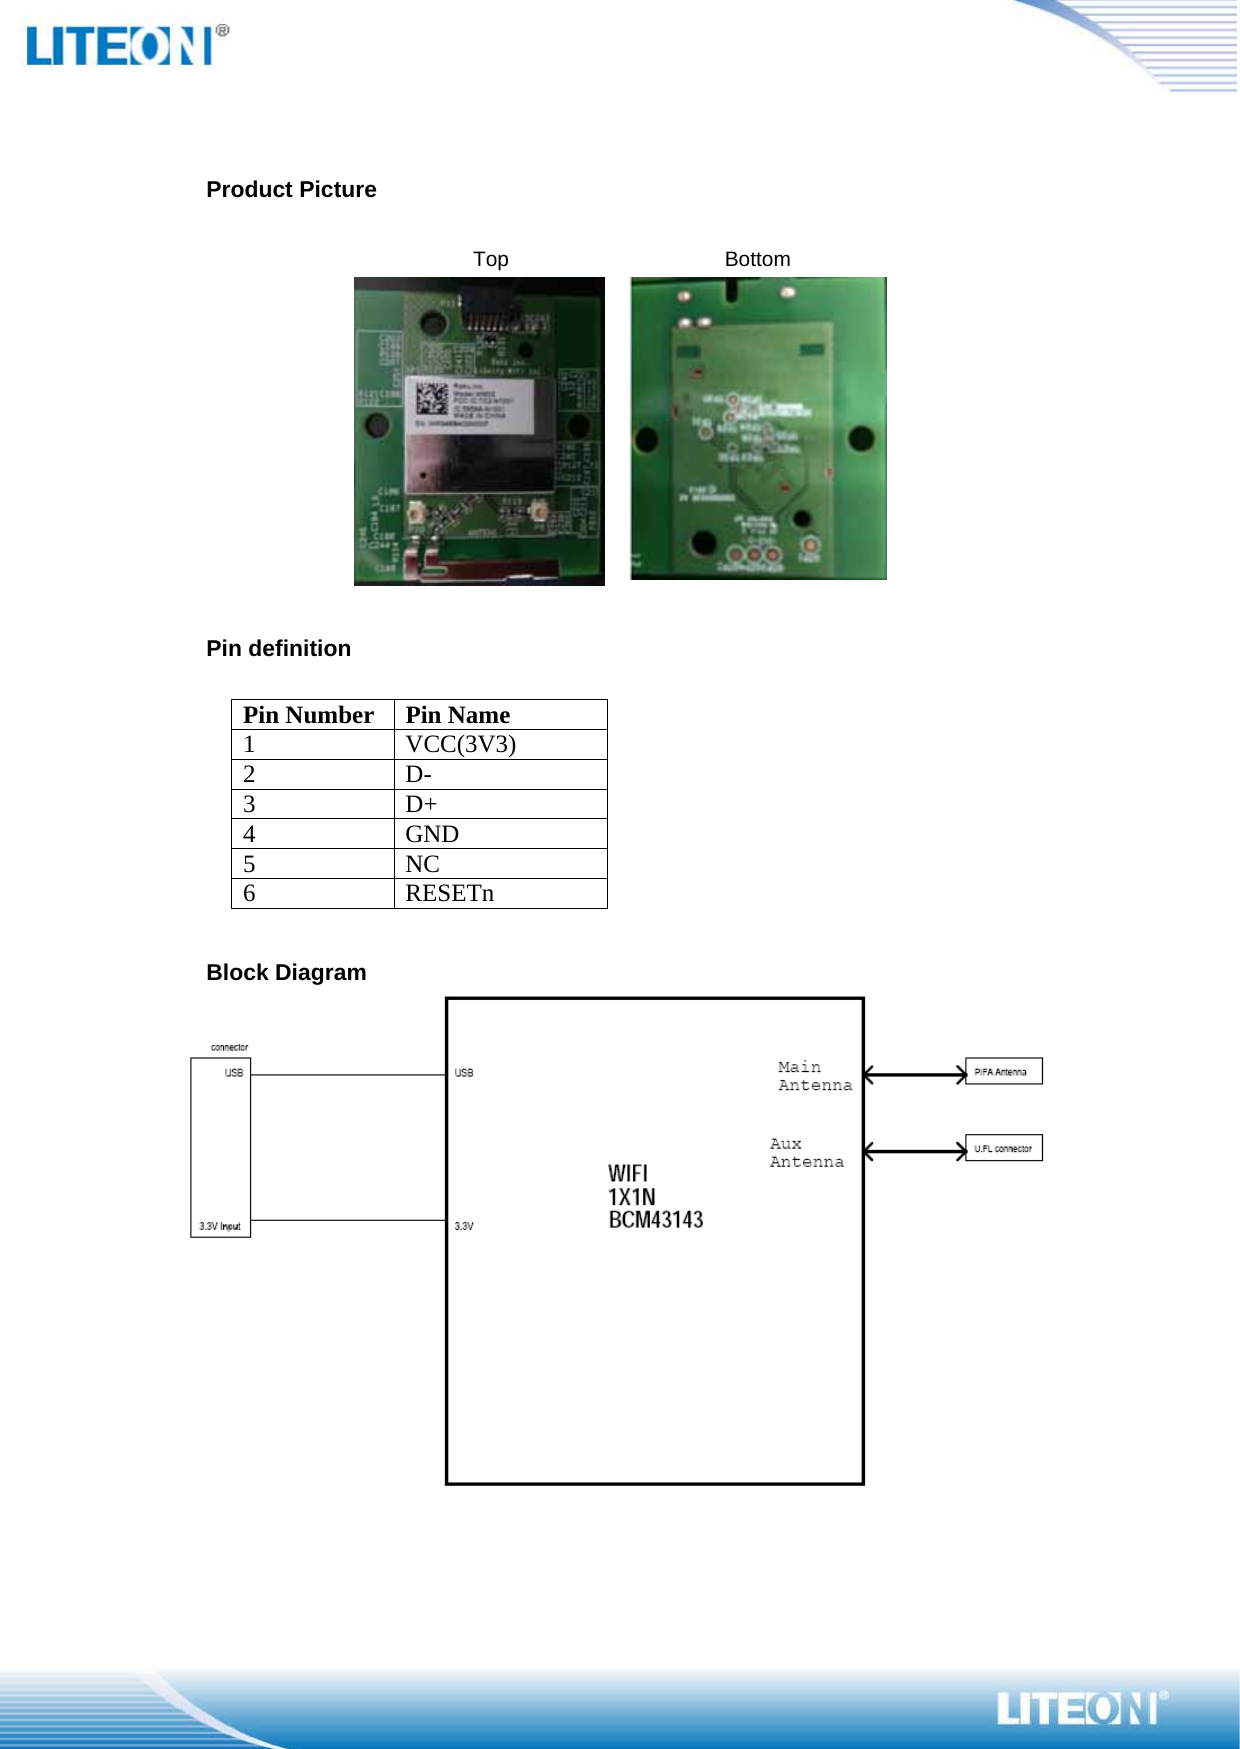    Product Picture    Top  Bottom   Pin definition  Pin Number Pin Name 1 VCC(3V3) 2 D- 3 D+ 4 GND 5 NC 6 RESETn  Block Diagram   